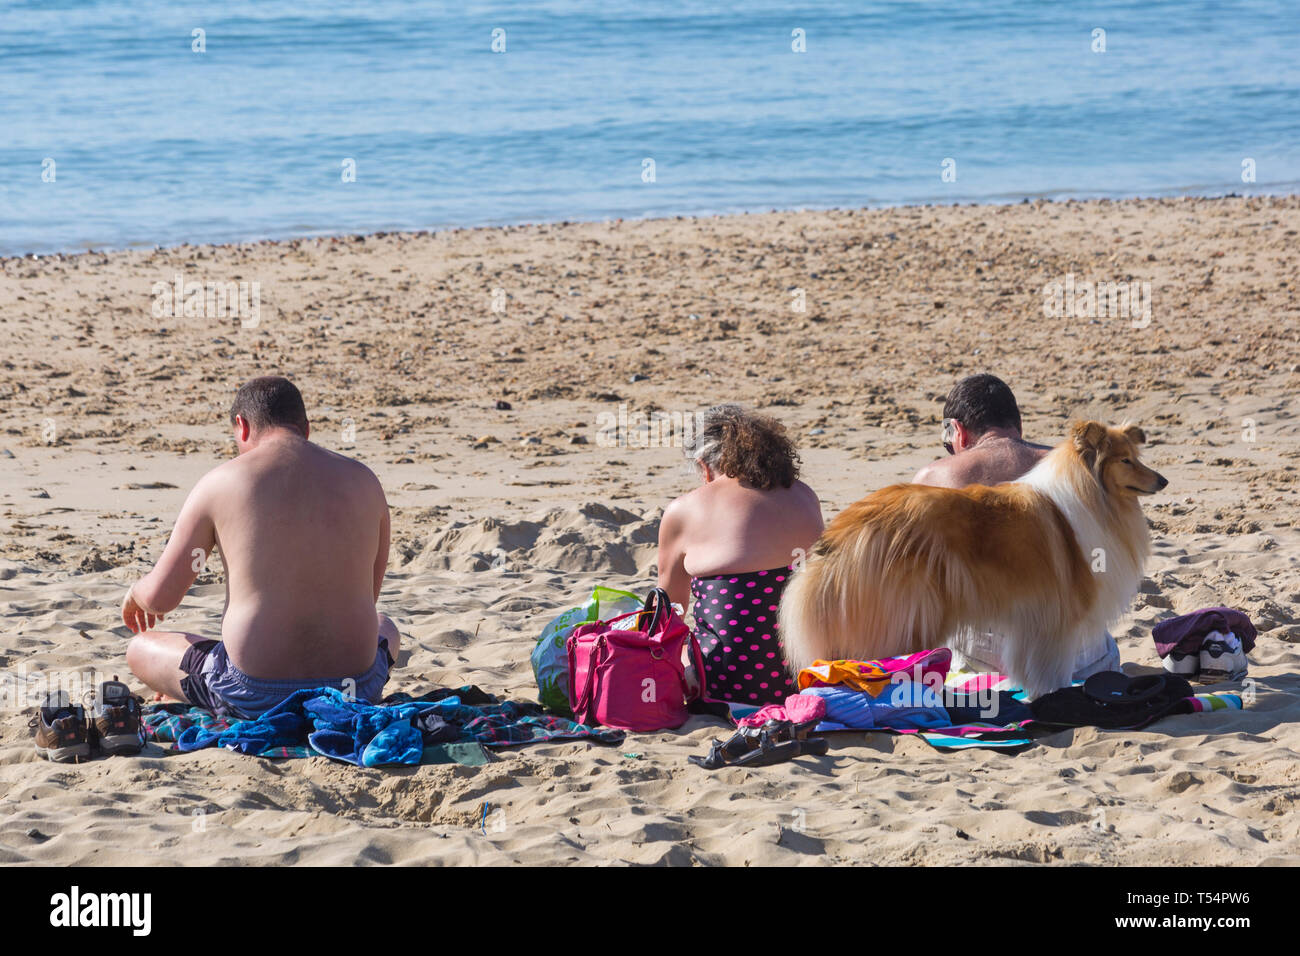 Bournemouth, Dorset, UK. 21st Apr 2019. UK weather: the heatwave continues with hot and sunny weather, as beachgoers head to the seaside to enjoy the heat and sunshine at Bournemouth beaches for the Easter holidays - mid morning and already beaches are getting packed, as sunseekers get there early to get their space. People sunbathing with Rough Collie dog. Credit: Carolyn Jenkins/Alamy Live News Stock Photo